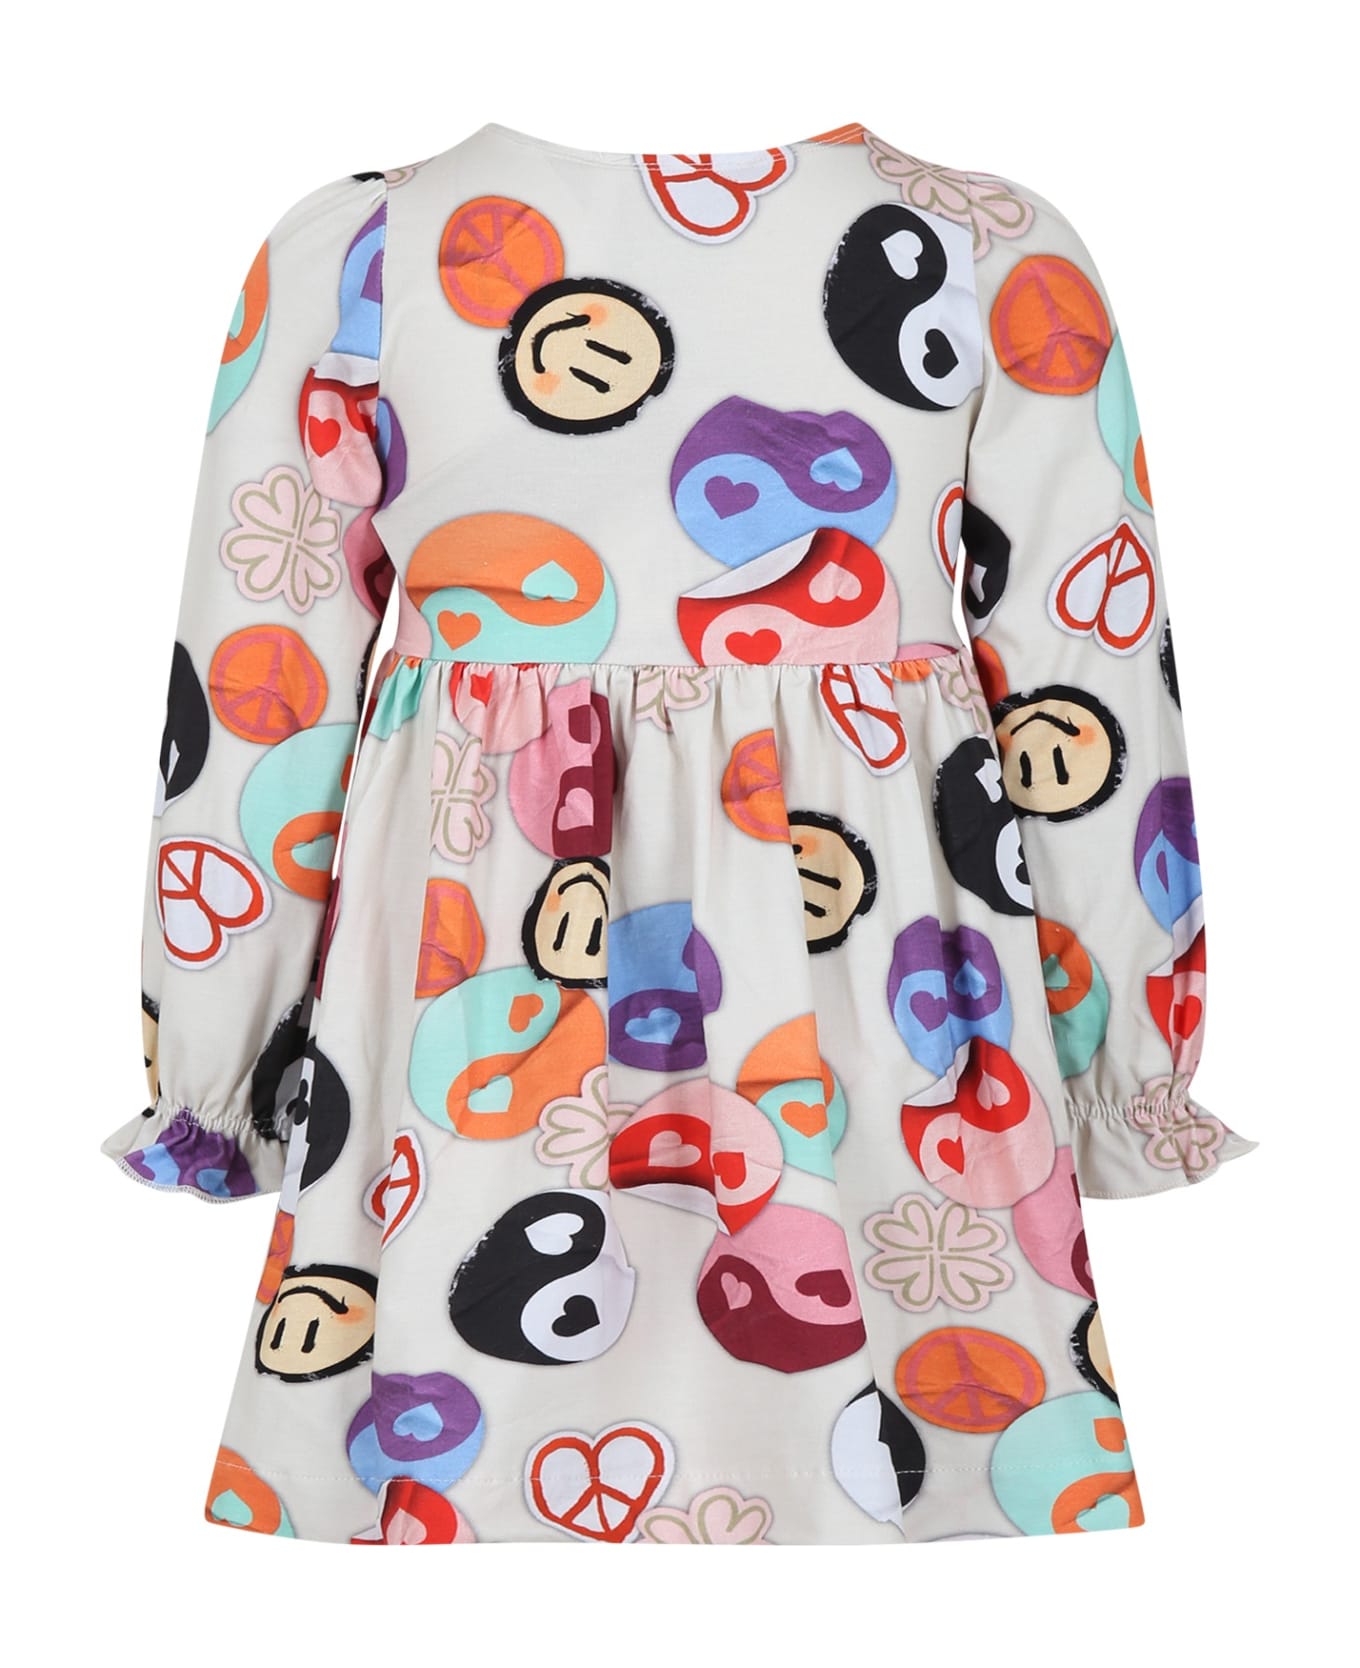 Molo Ivory Dress For Girl With Smiley And Yin And Yang Print - Multicolor